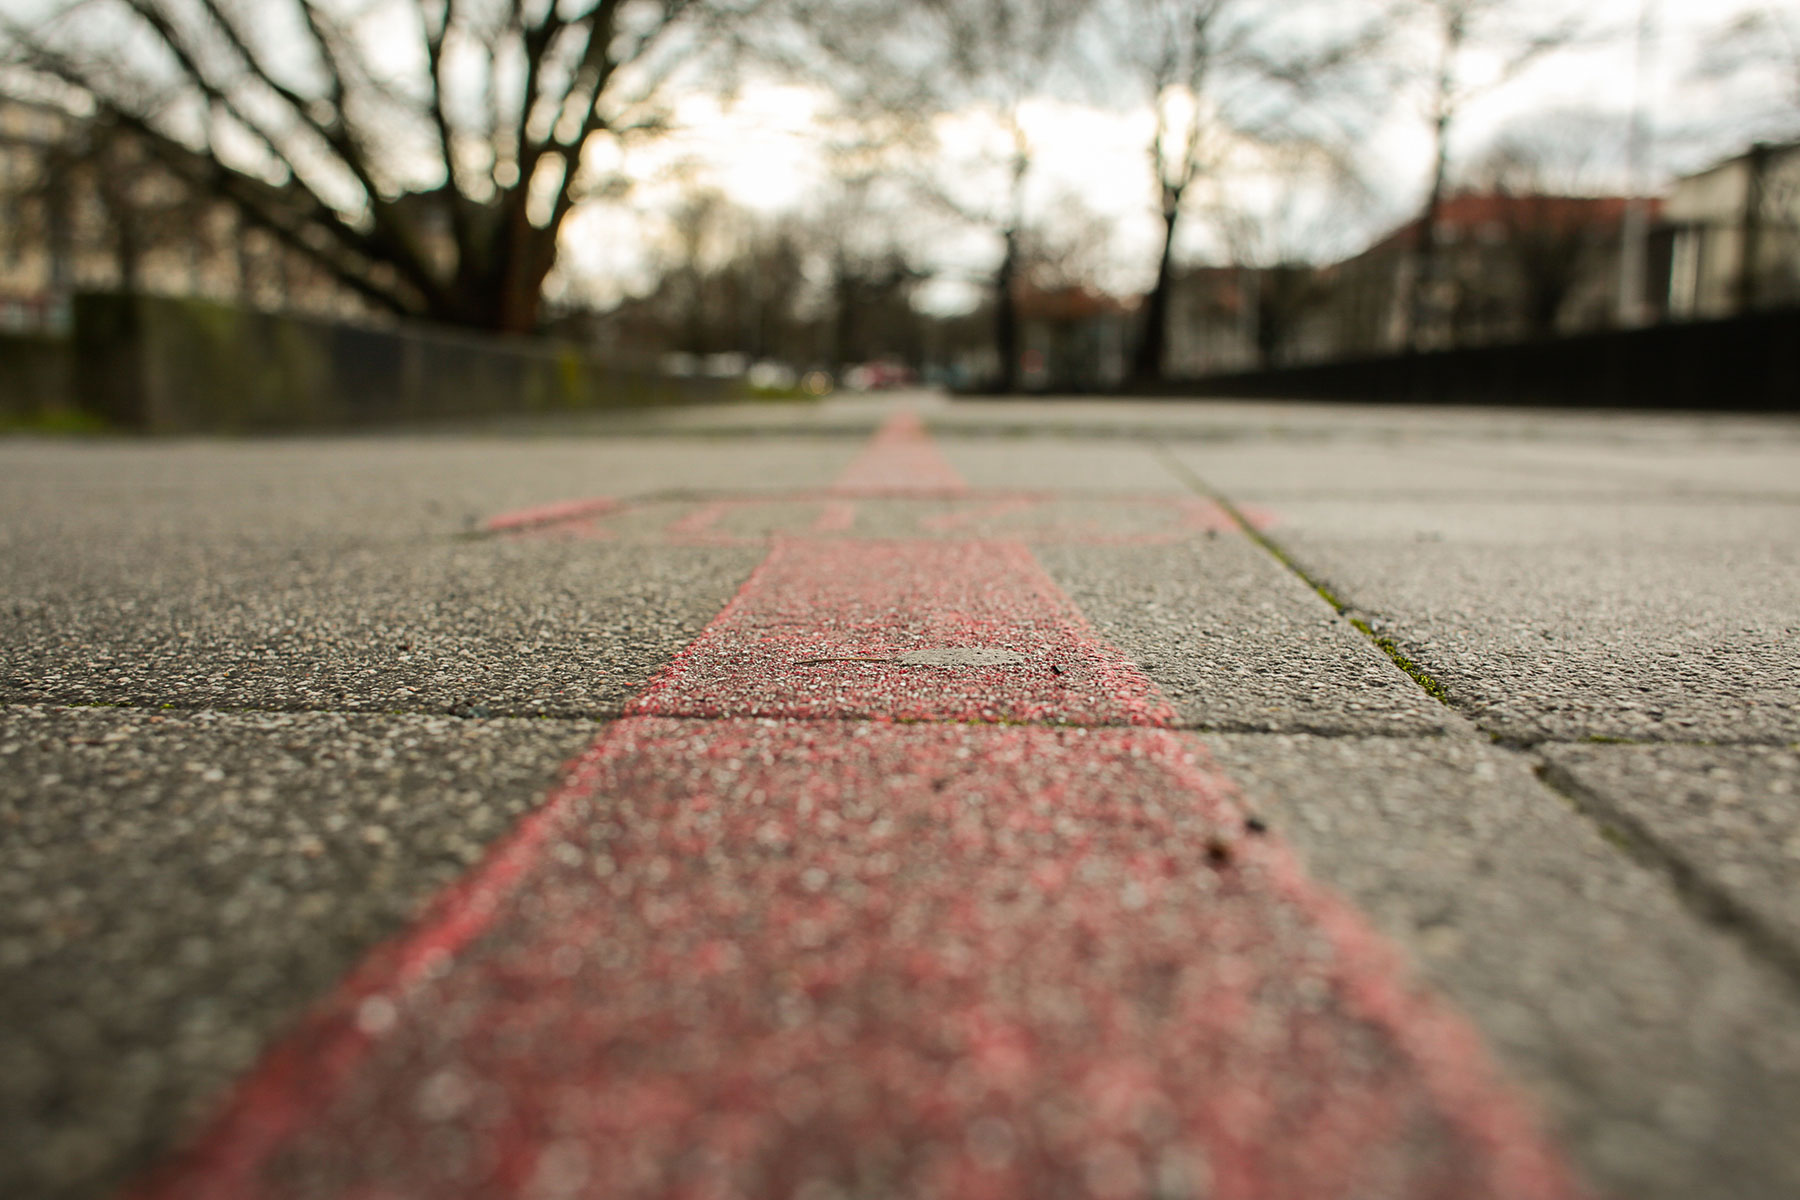 Details of a red path on a street in Hanover